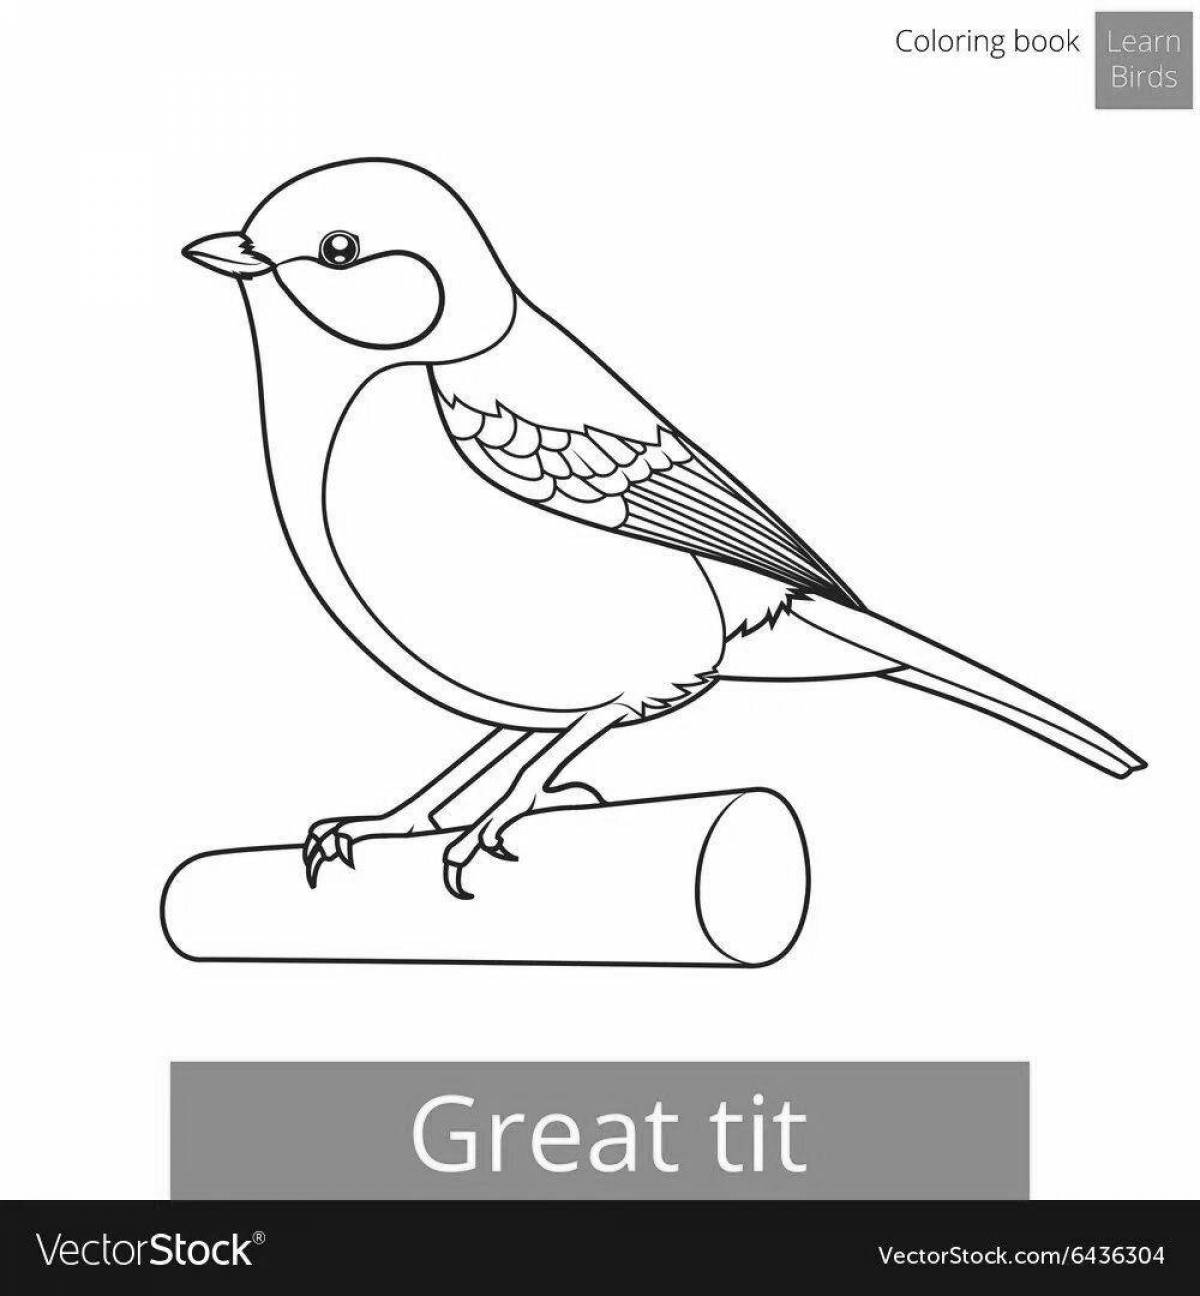 Incredible tit coloring pages for kids